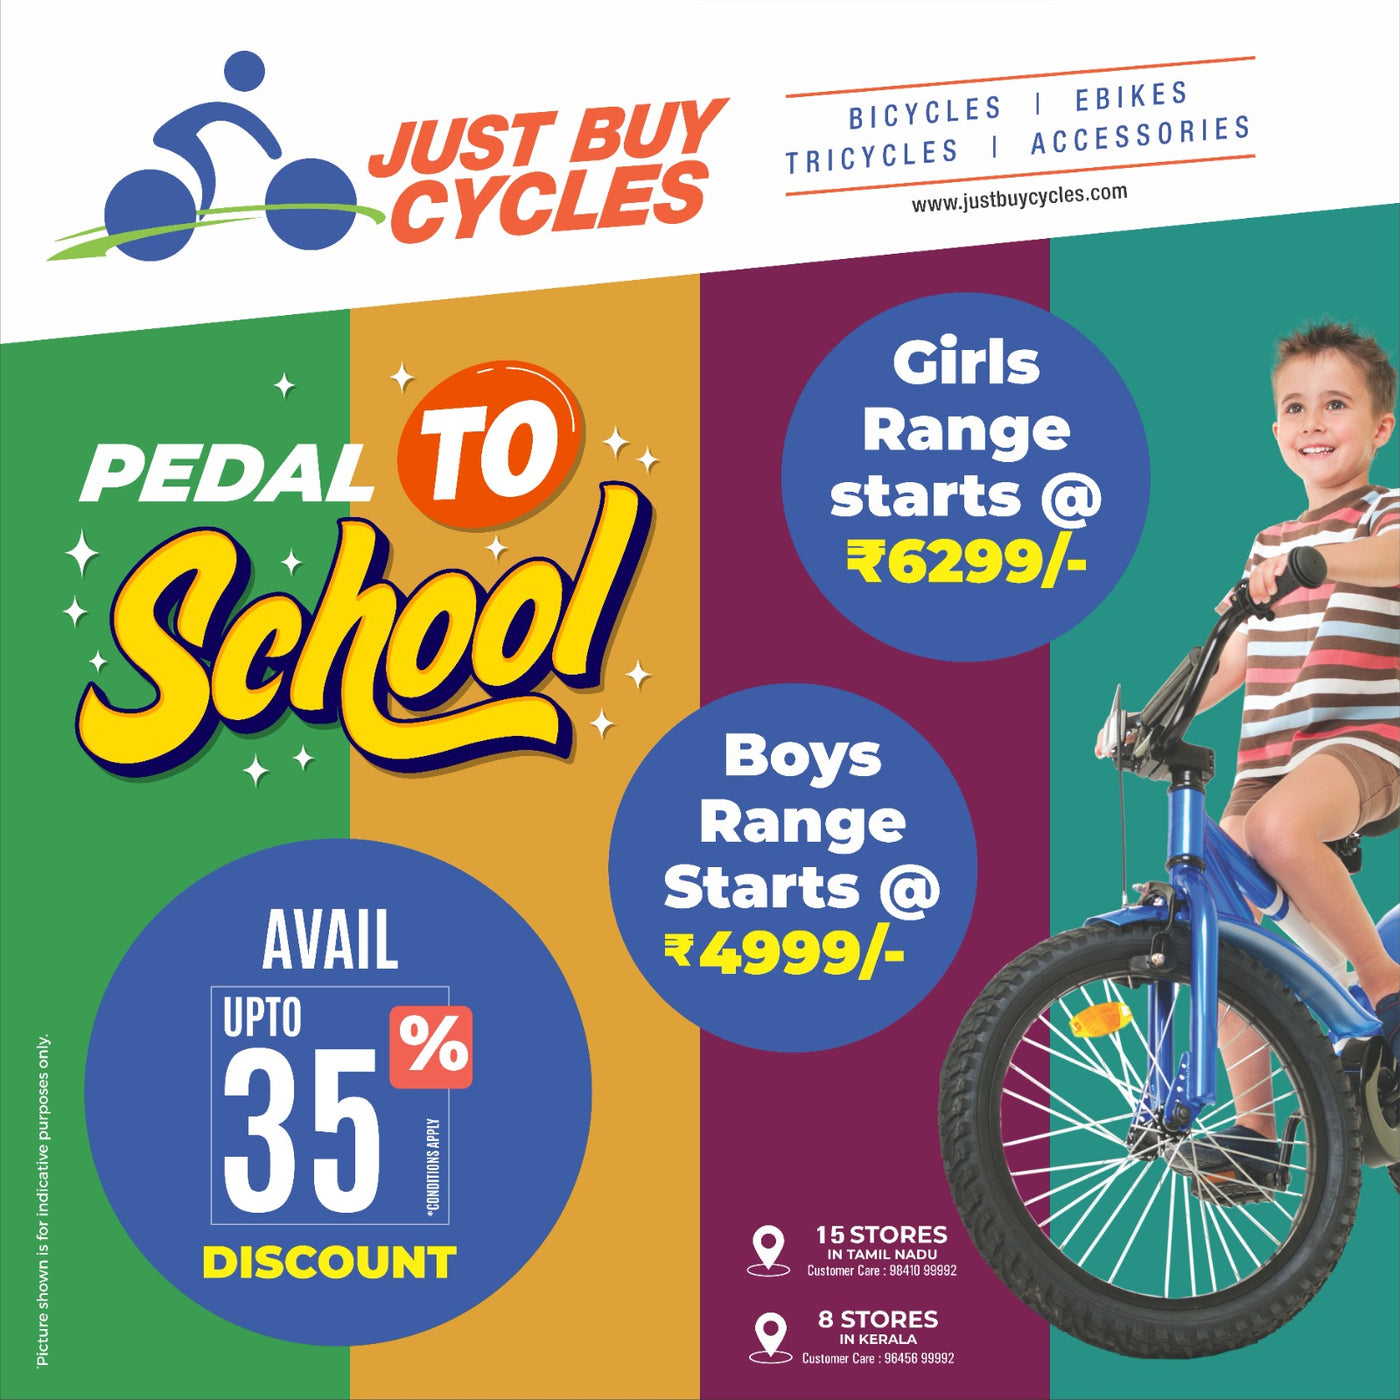 Buy Cycles Online Just Buy Cycles